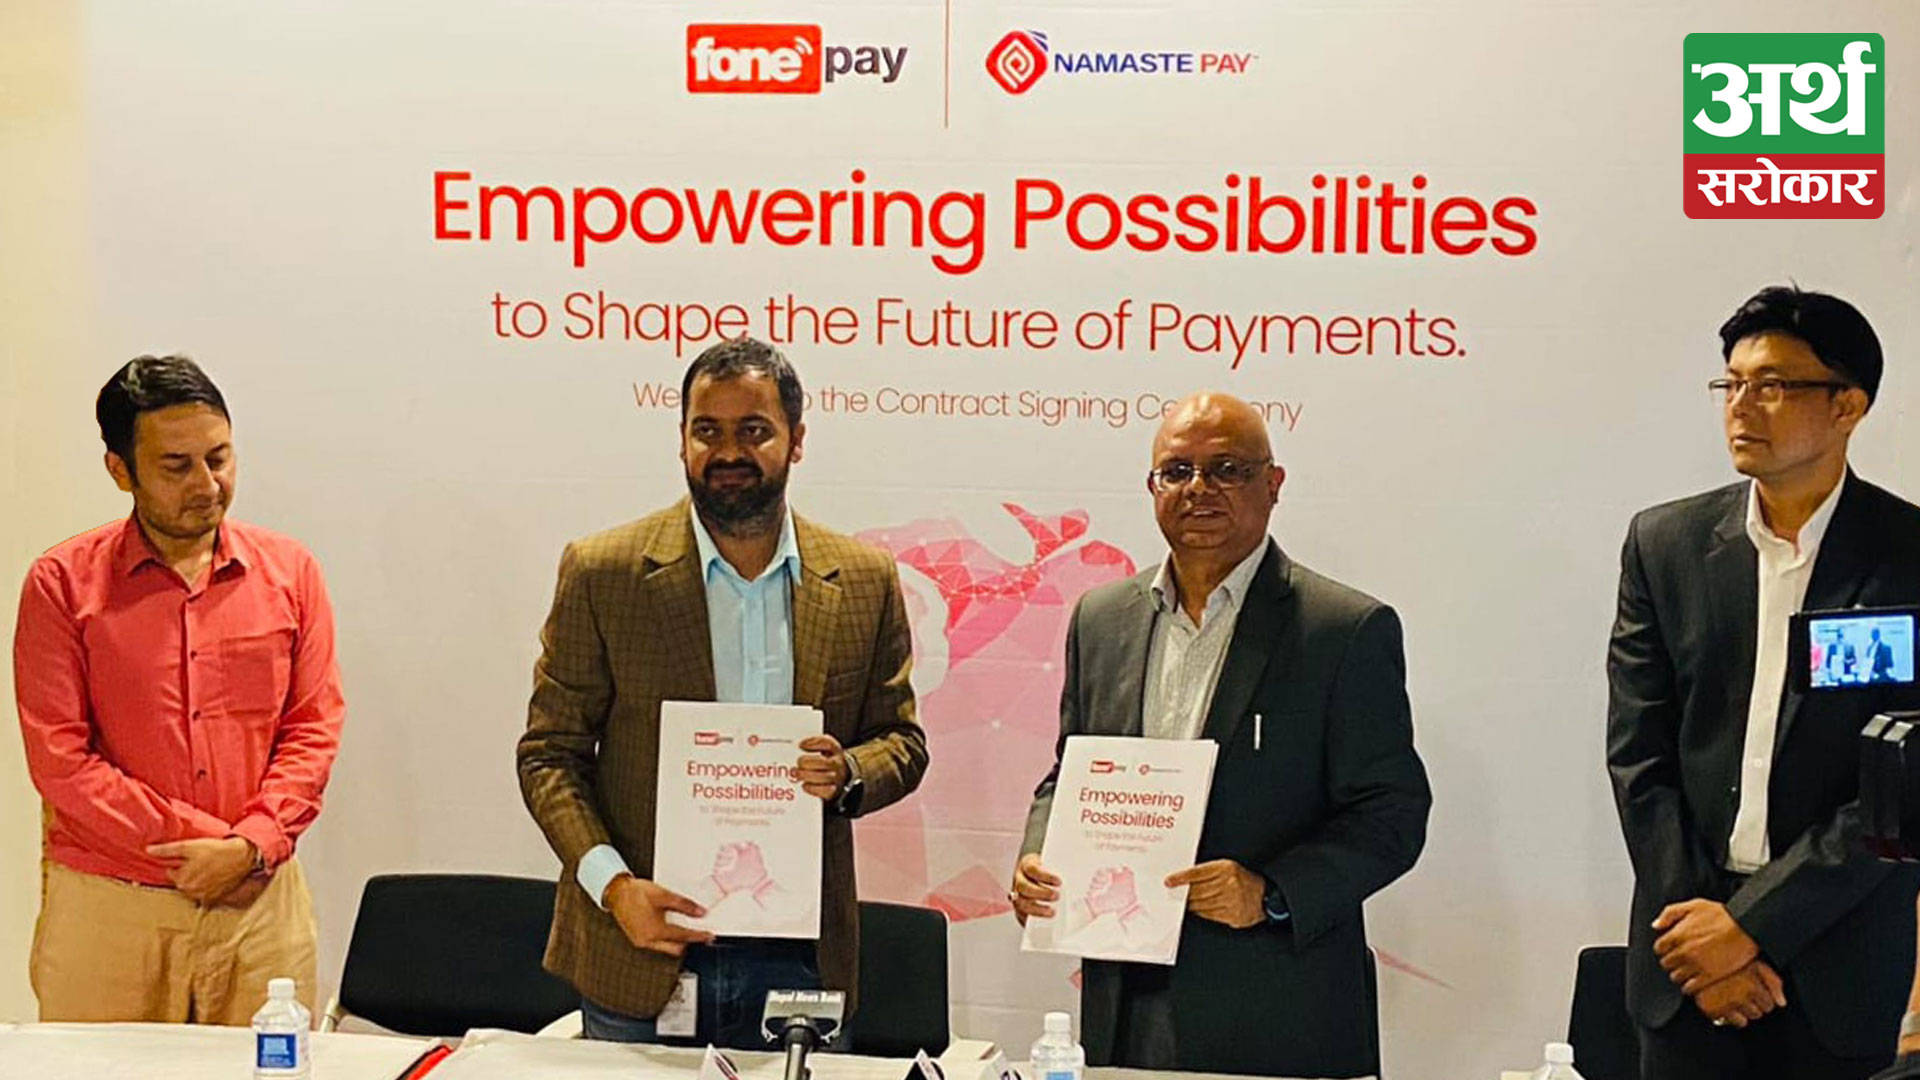 Fonepay welcomes Namaste Pay in its interoperable payment ecosystem